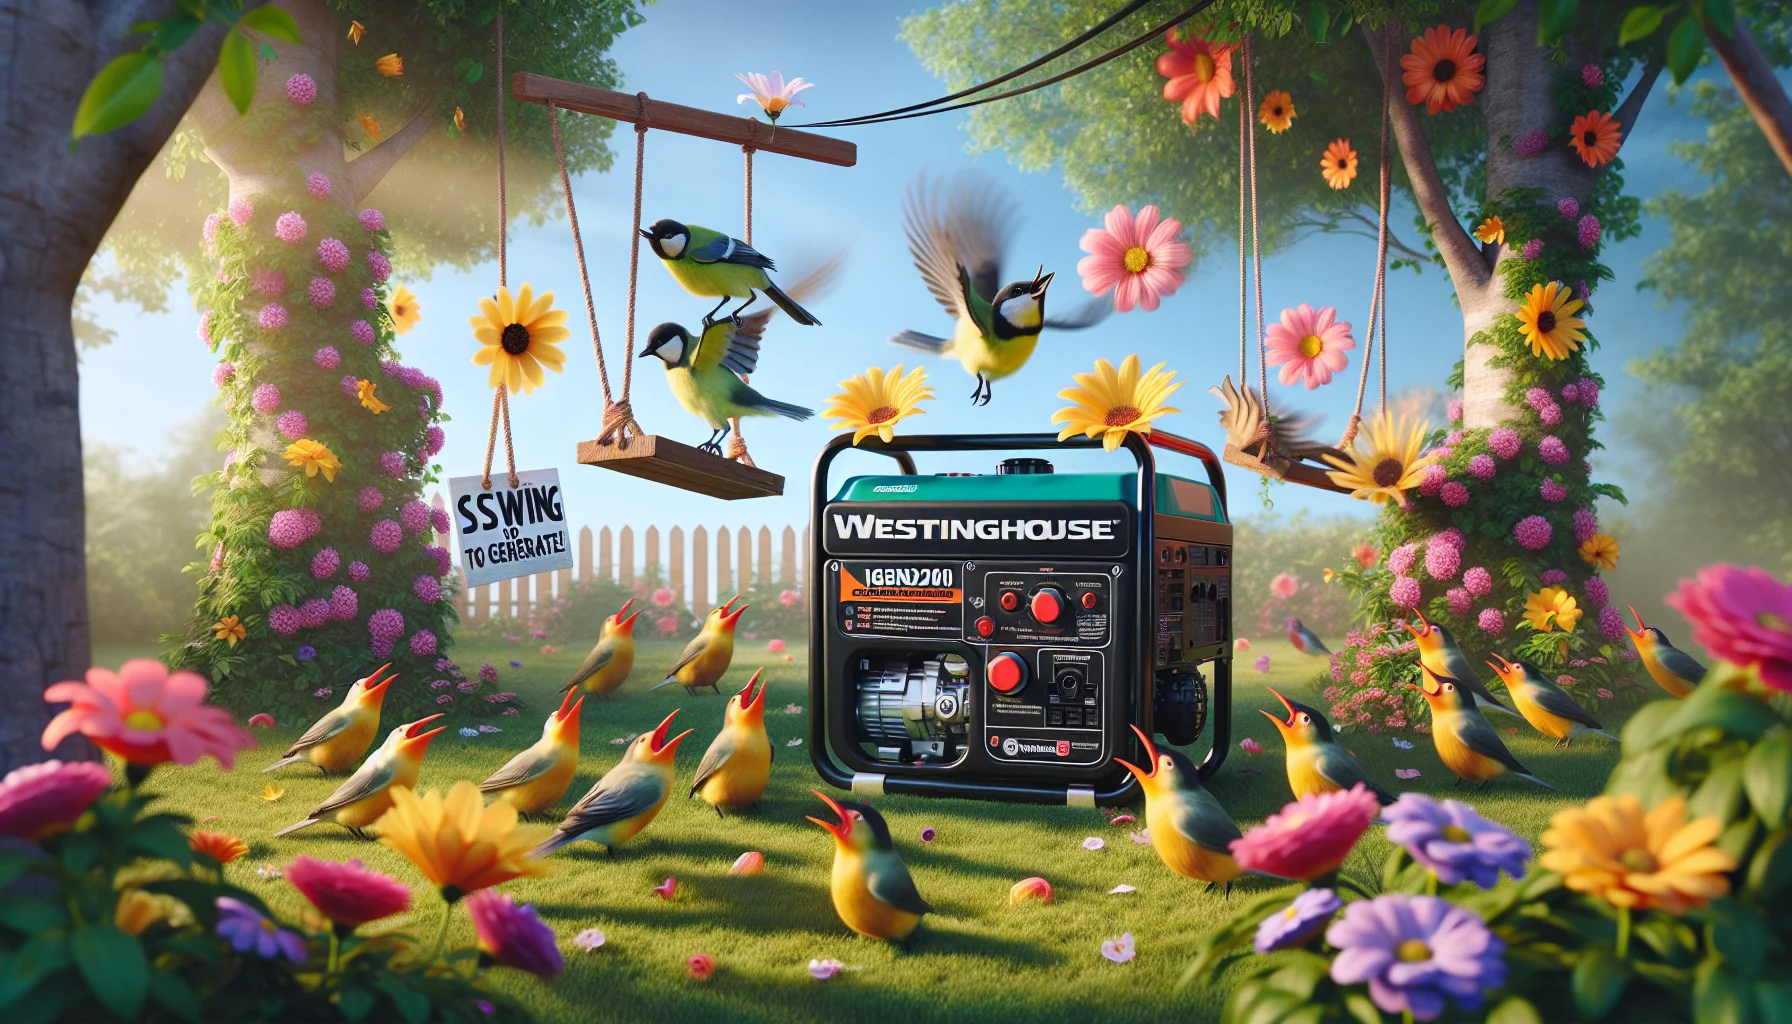 Create an image that features a Westinghouse iGen2200 portable generator in a humorous scenario. Display the generator in a brightly colored, outdoor garden setting with blooming flowers and chirping birds around. Suddenly, all the flowers turn towards the generator, reaching with their petals as if trying to plug themselves into it, and the birds are playfully perched on the generator, seemingly trying to use their beaks to flick the switch on. Place a swing hanging from a tree nearby with a sign that reads 'Swing to Generate!'. Ensure the scenario feels playful and appealing, enticing viewers to generate their own electricity.